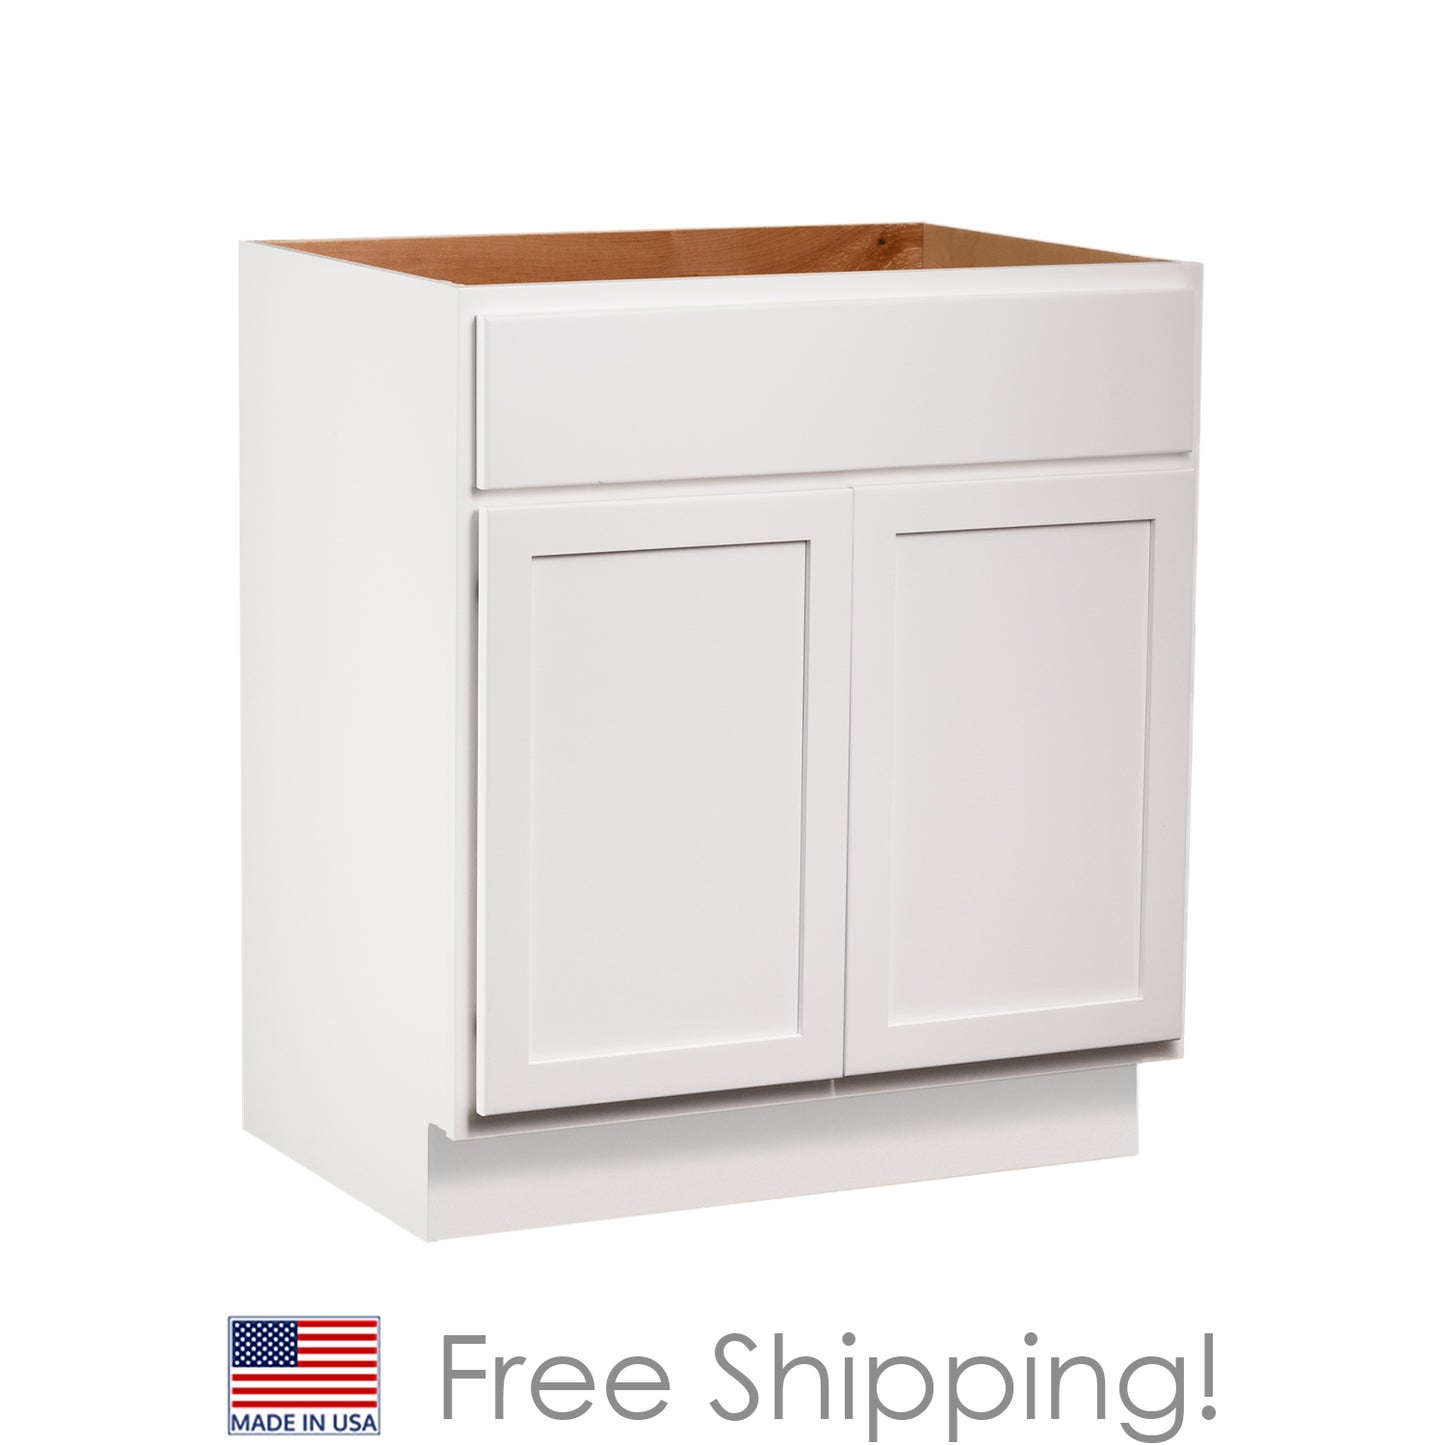 Quicklock RTA (Ready-to-Assemble) Pure White Vanity Base Cabinet | 24"Wx34.5"Hx21"D